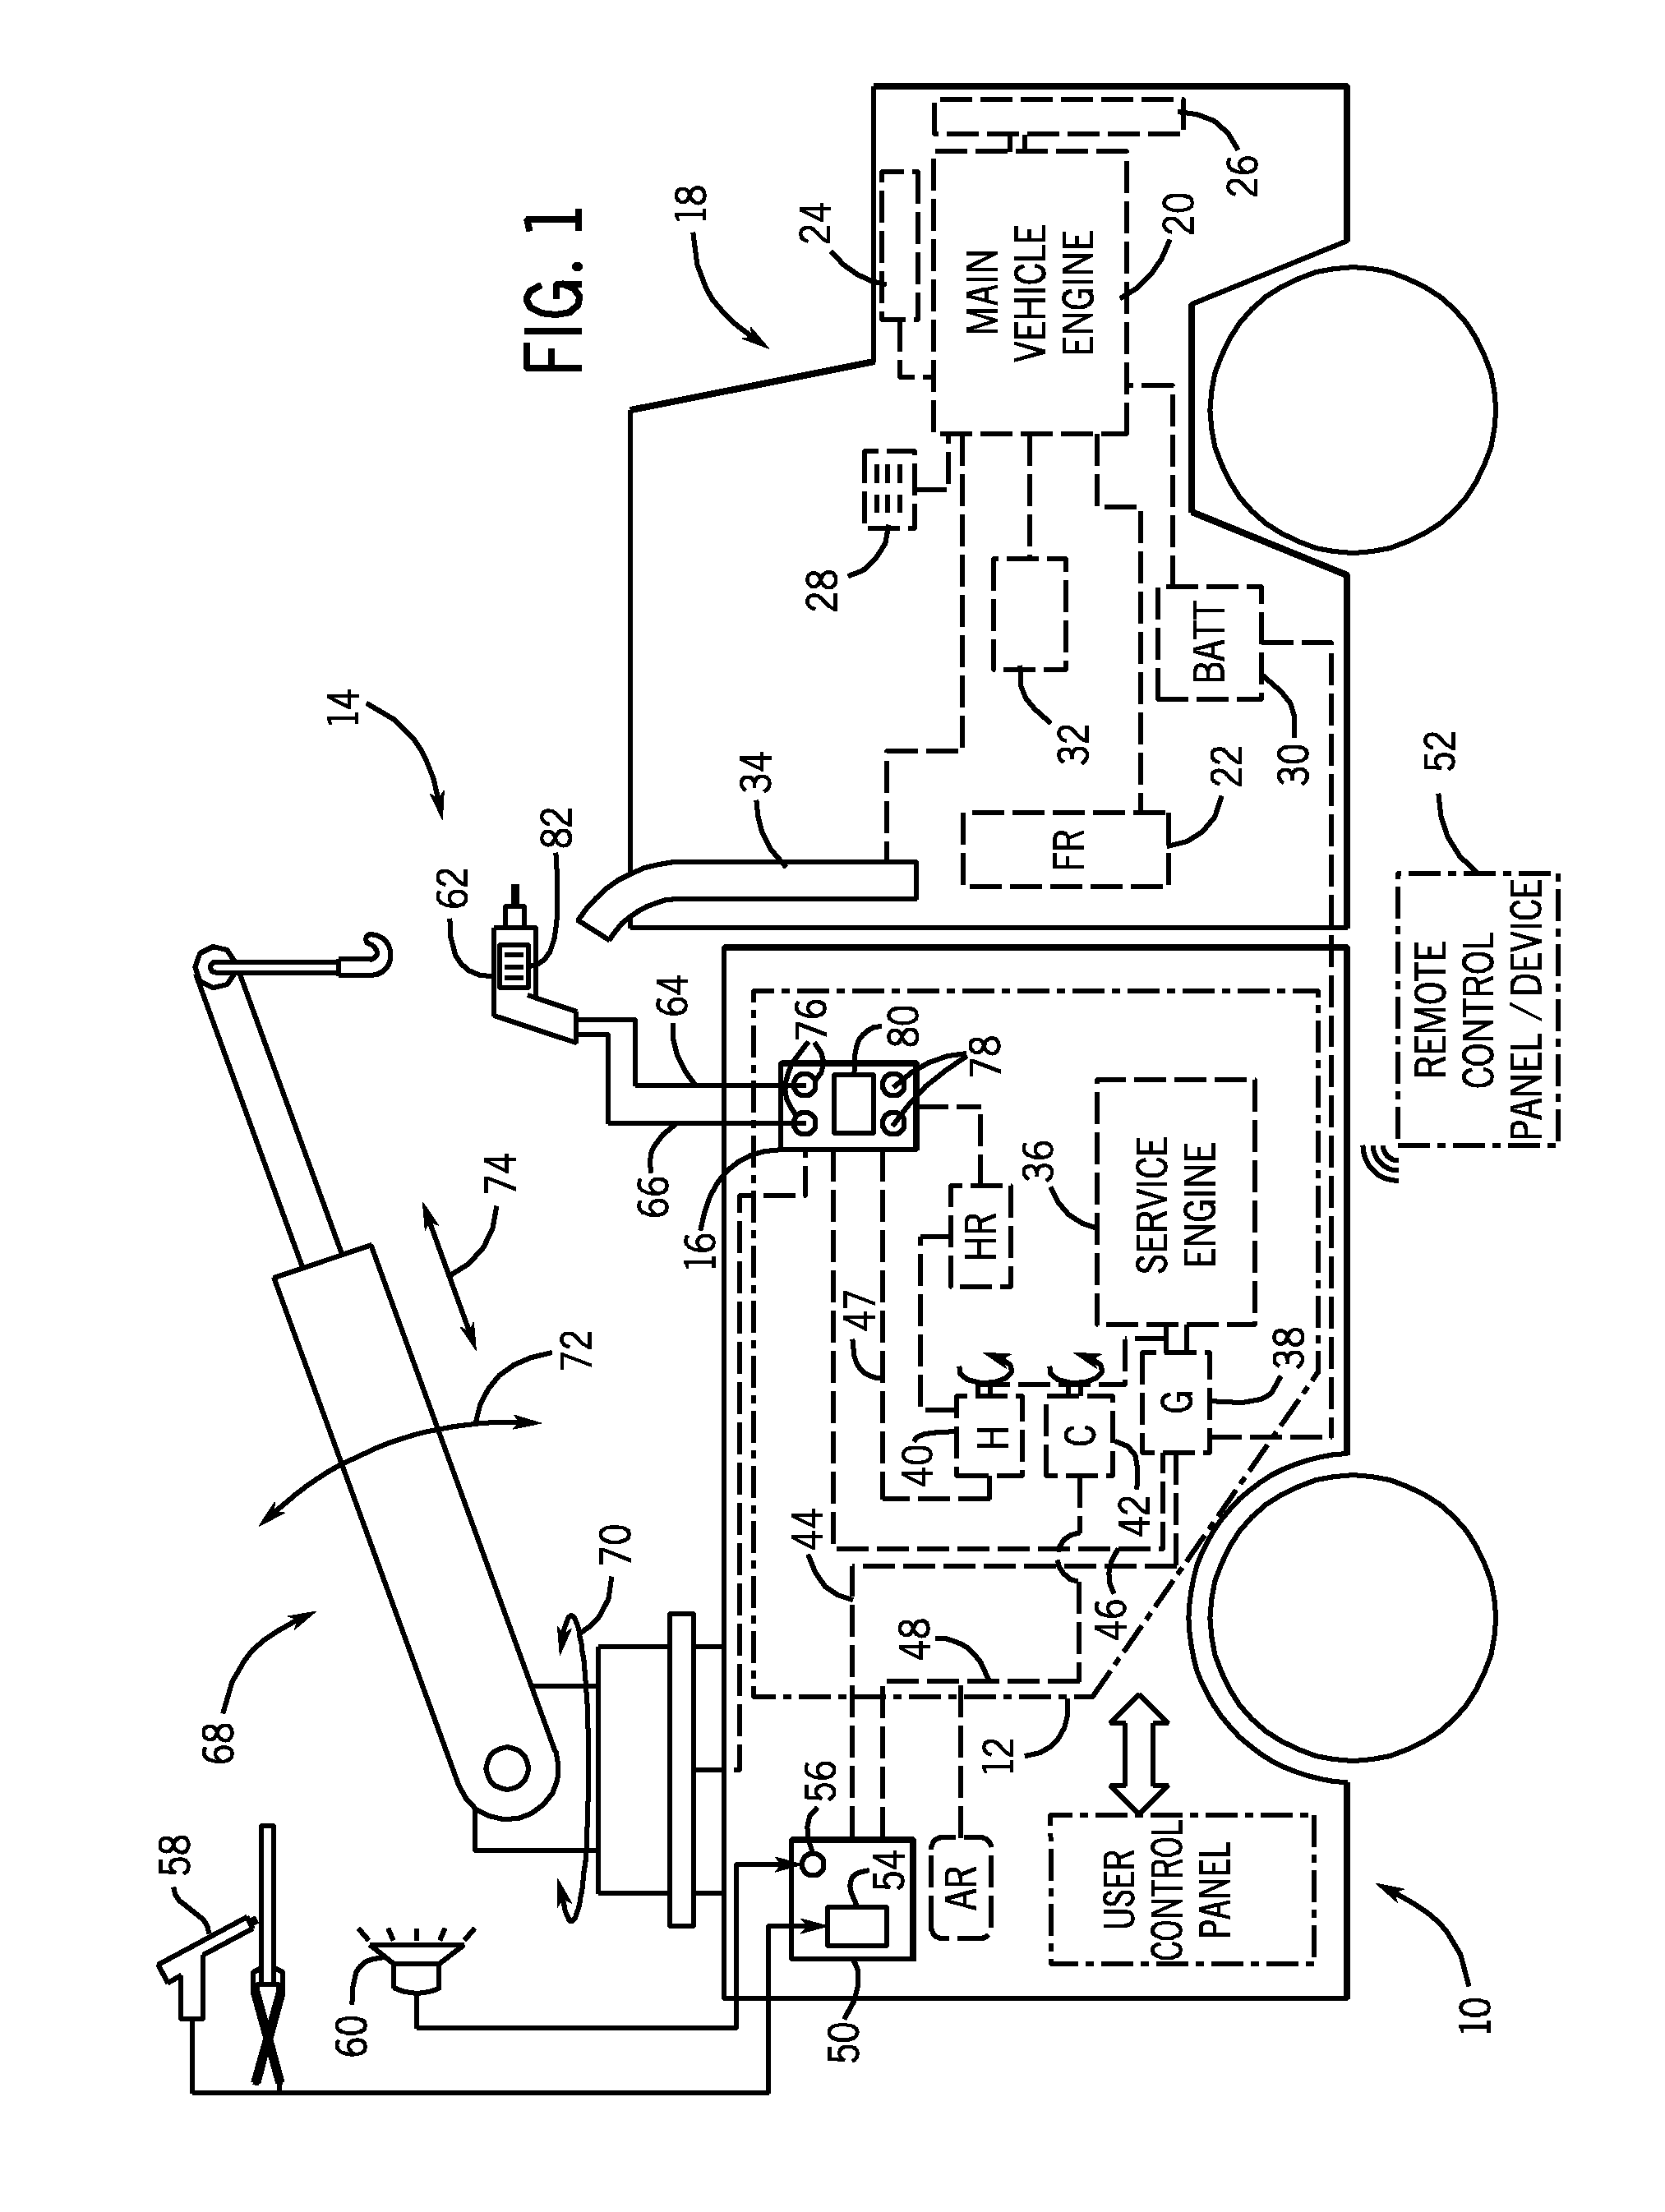 Hydraulic tool control that switches output